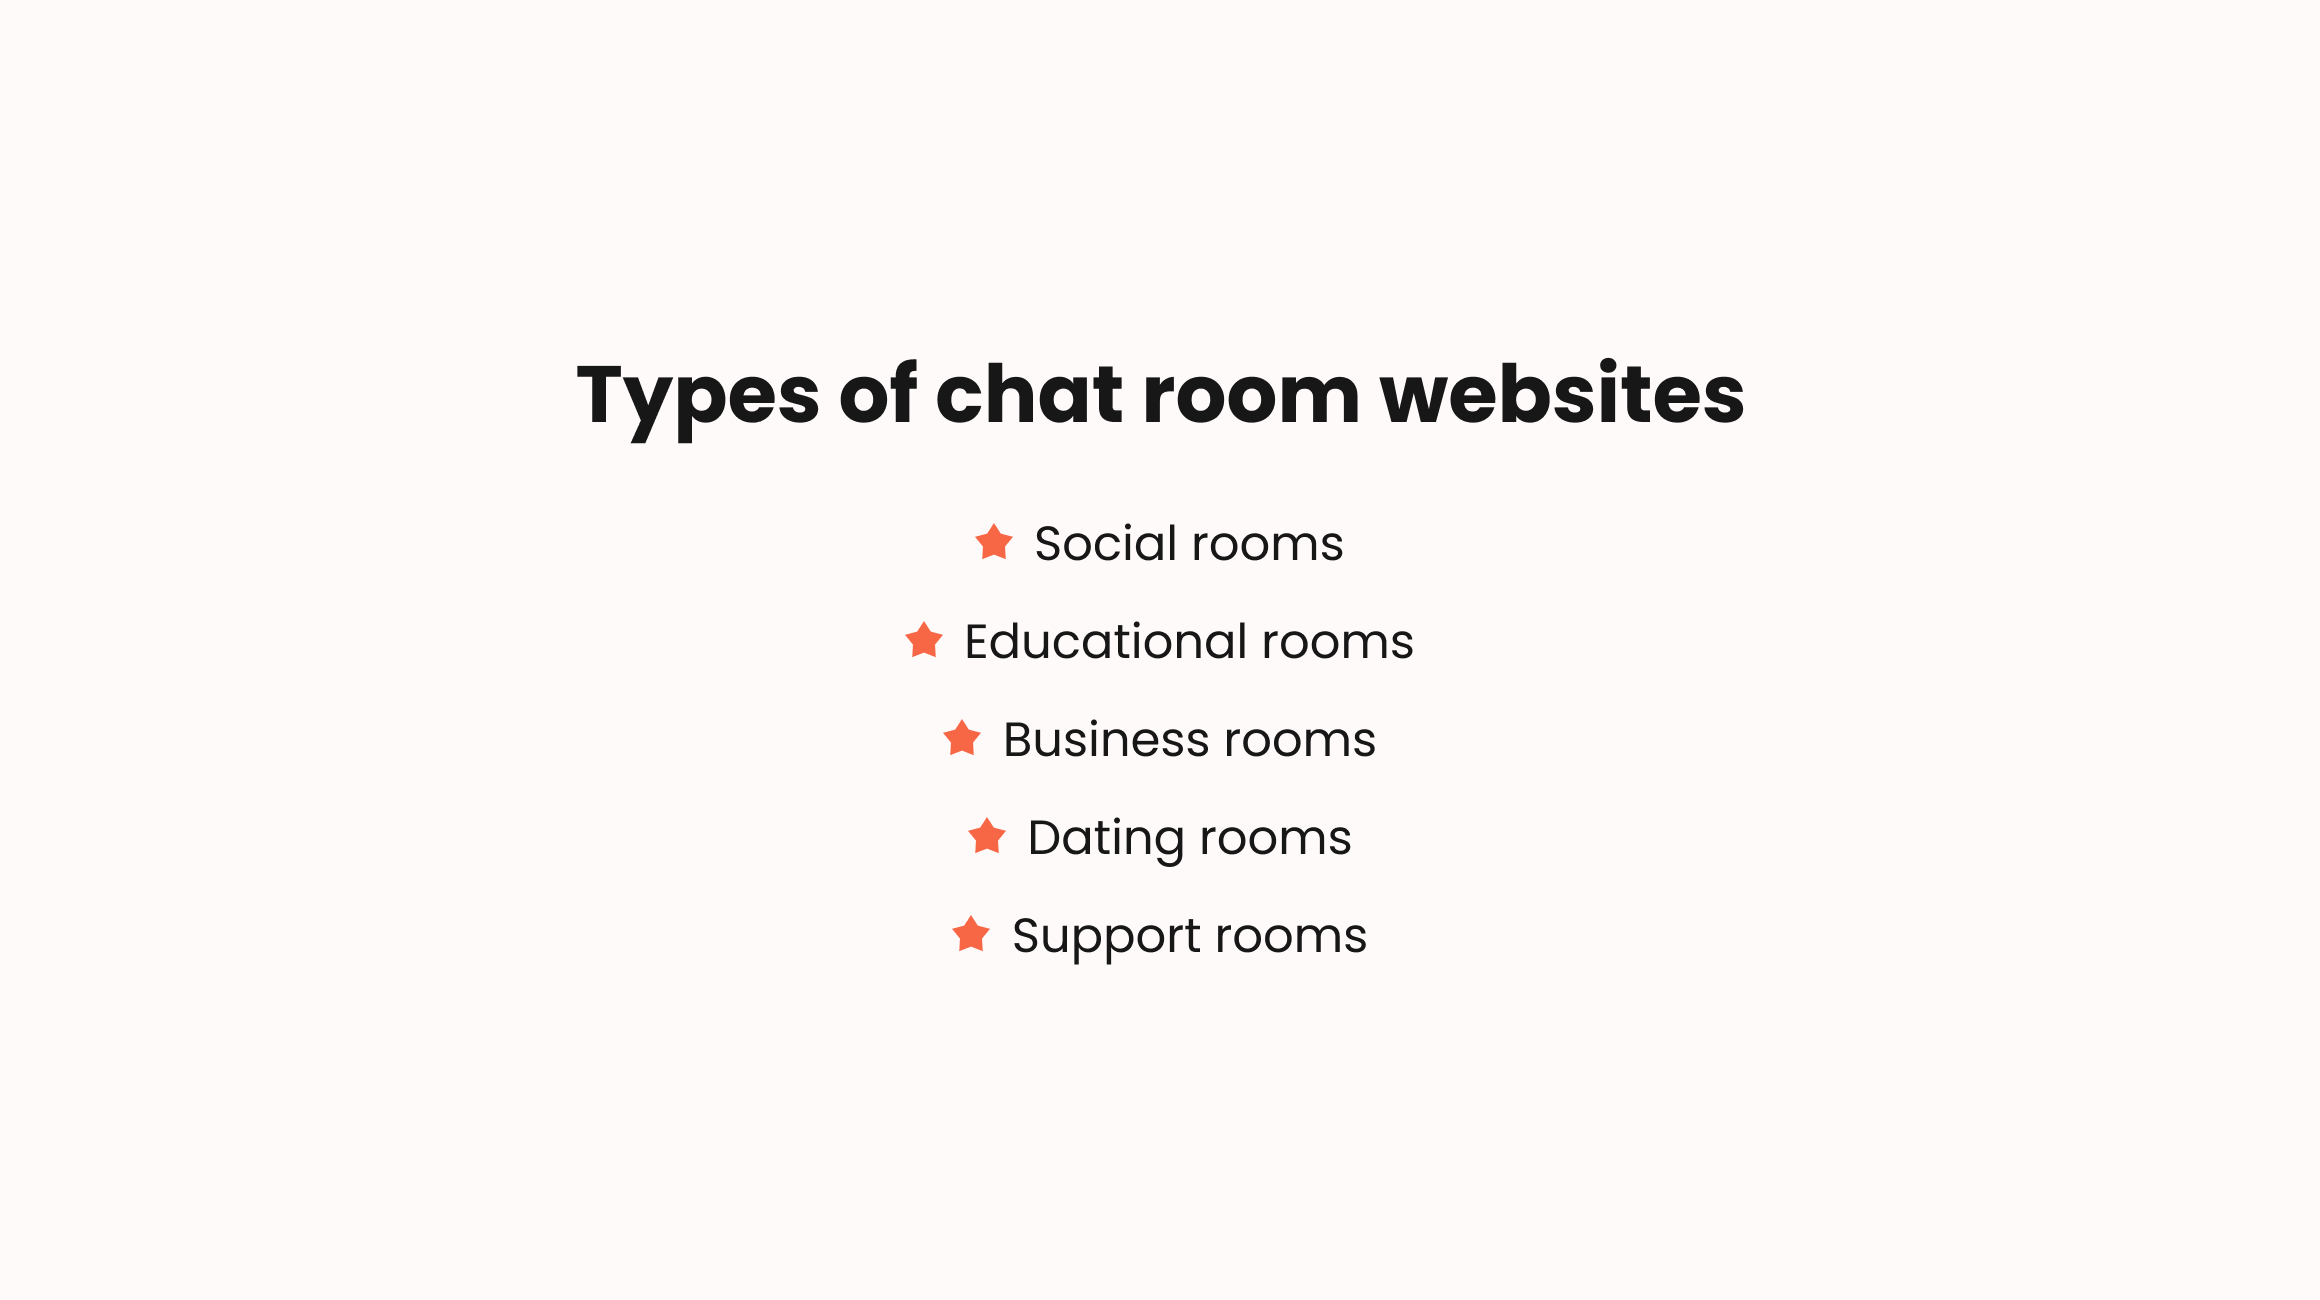 Types of chat room websites